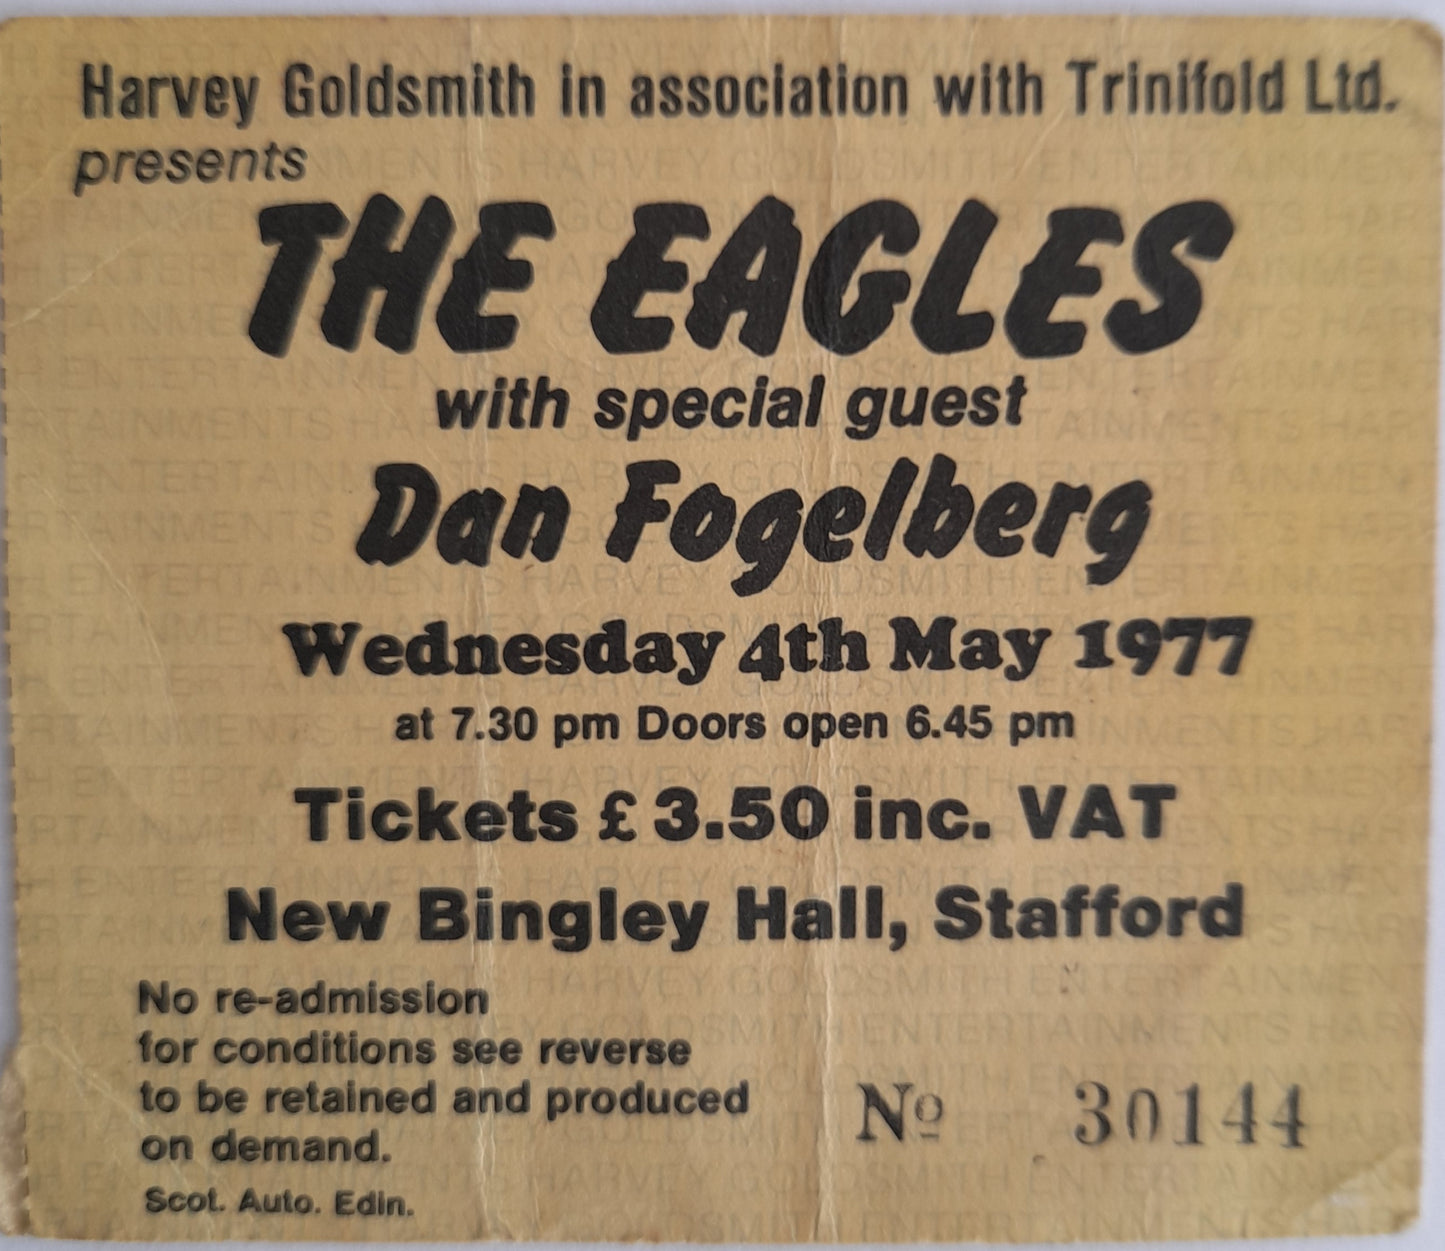 The Eagles with special guest Dan Fogelberg vintage used ticket stub 4th May 1977 Stafford